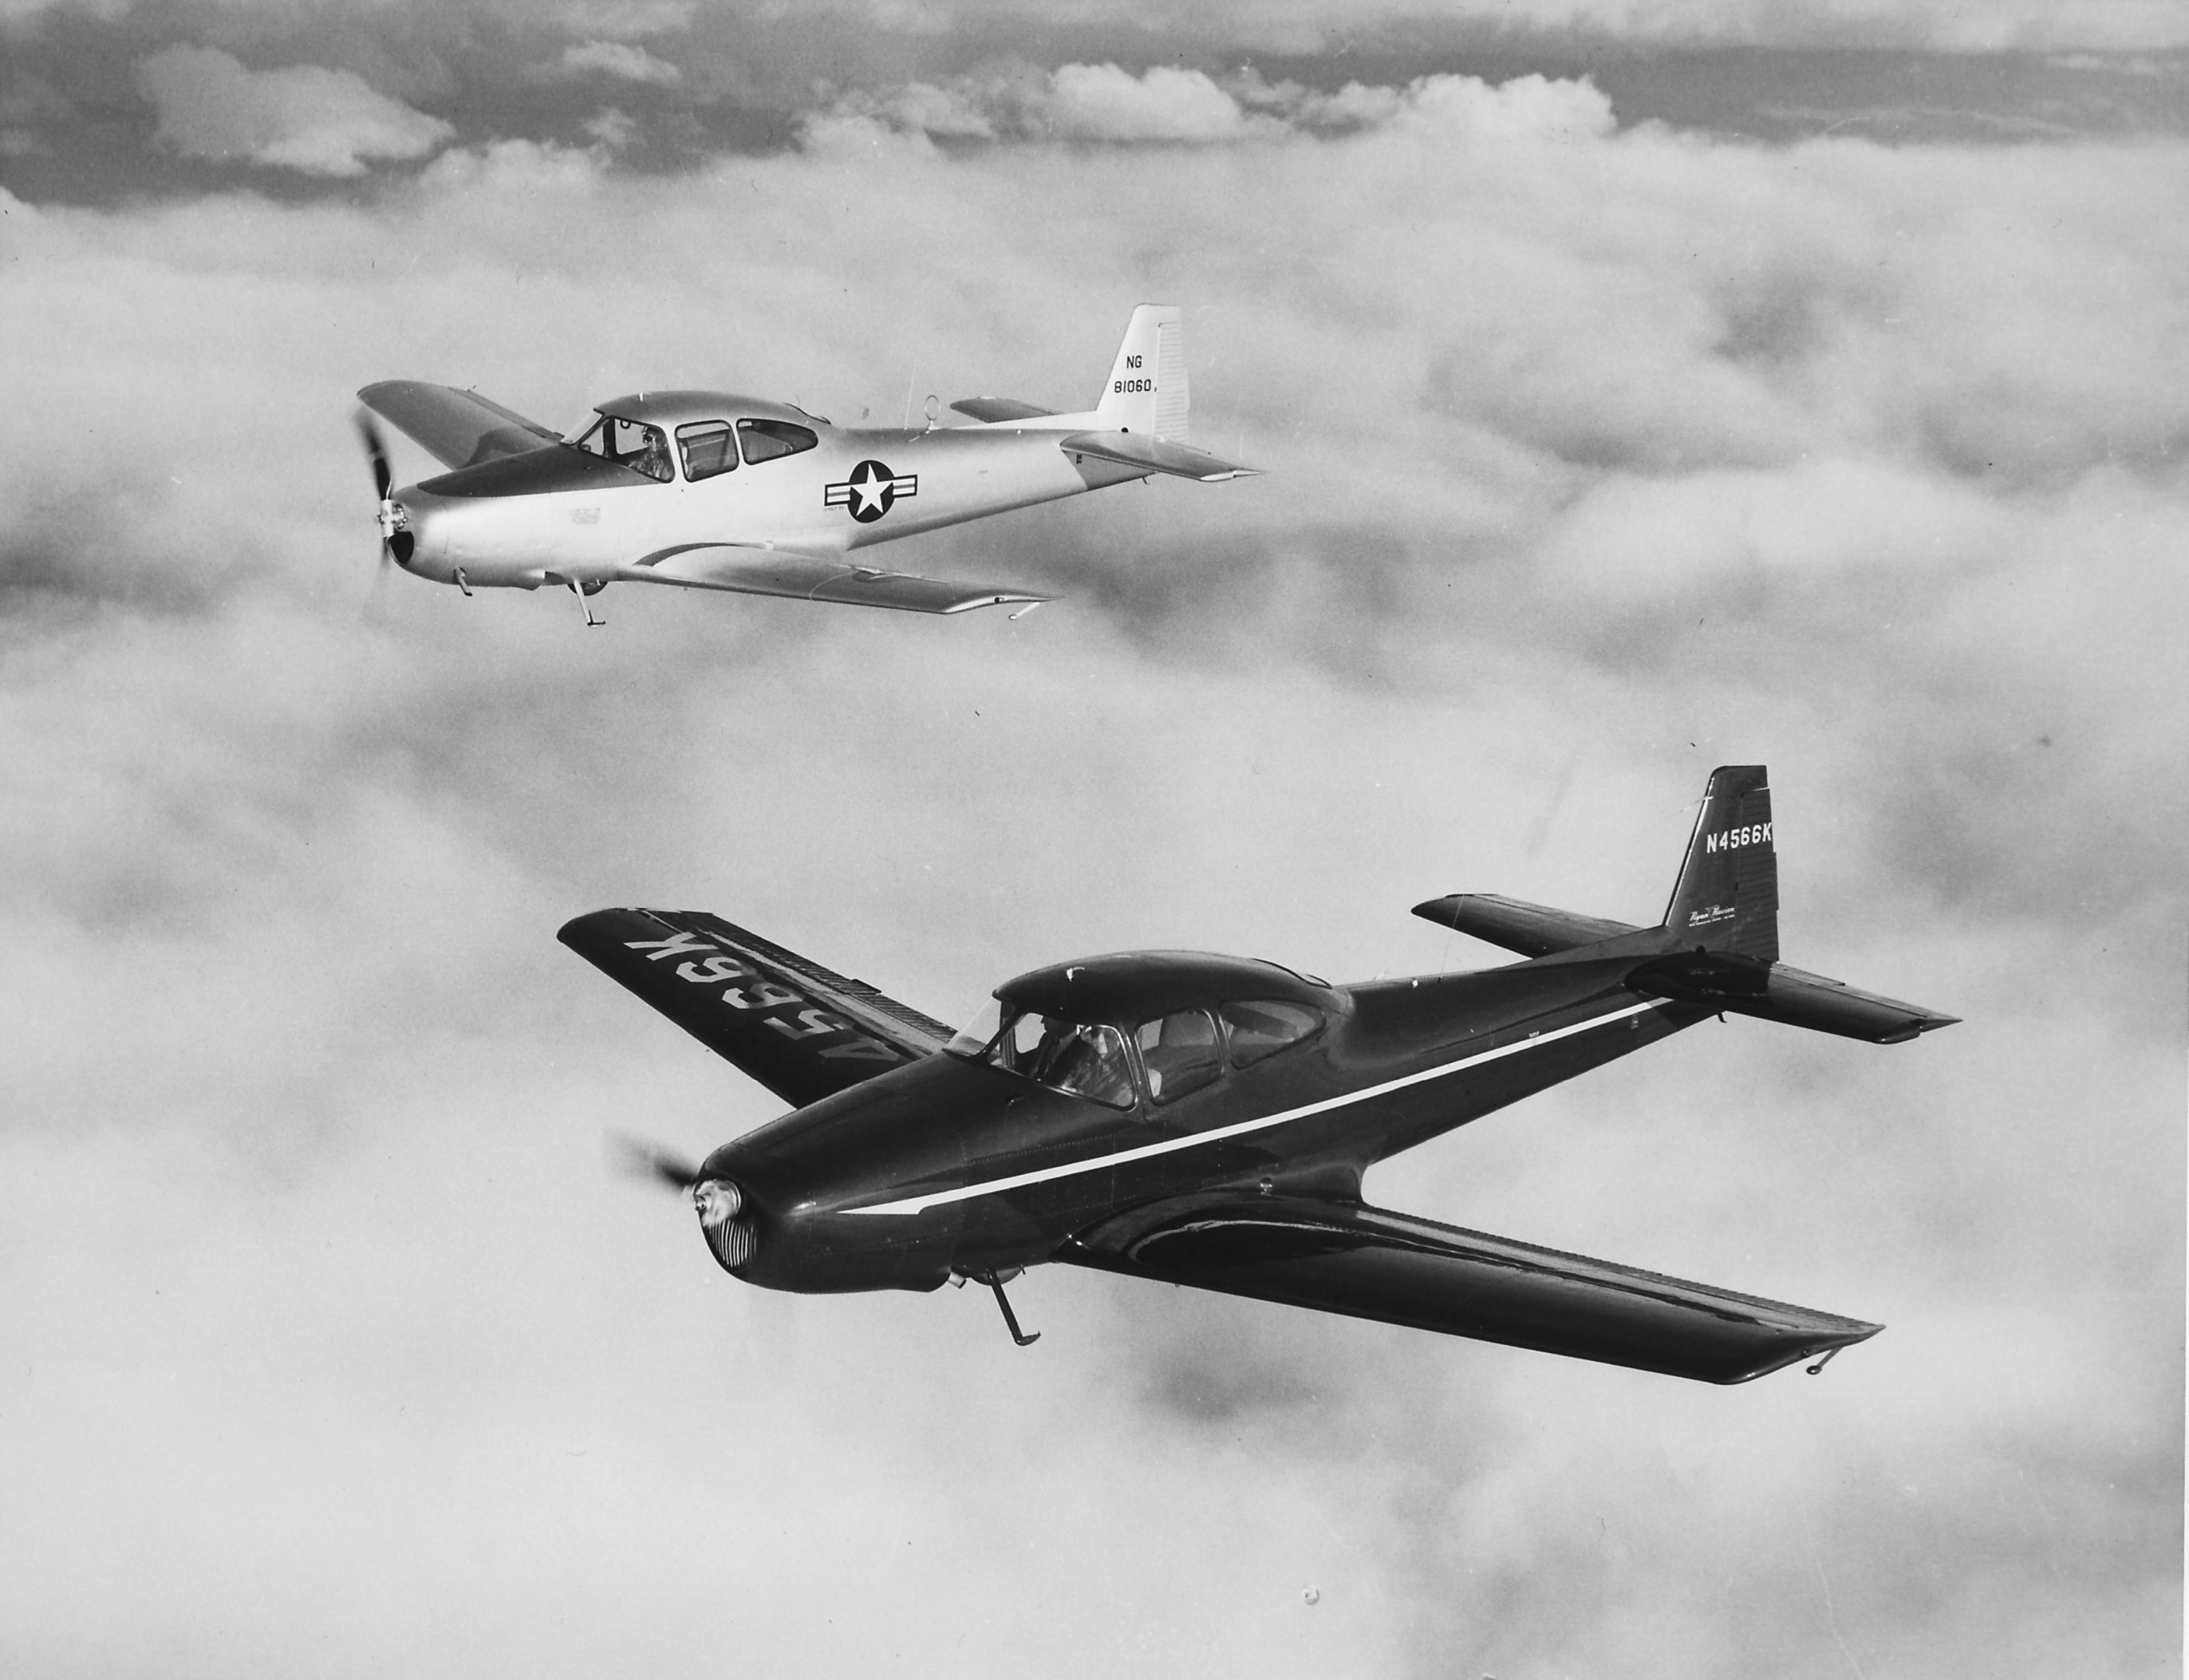 L-17B and Navion N4566K in formation